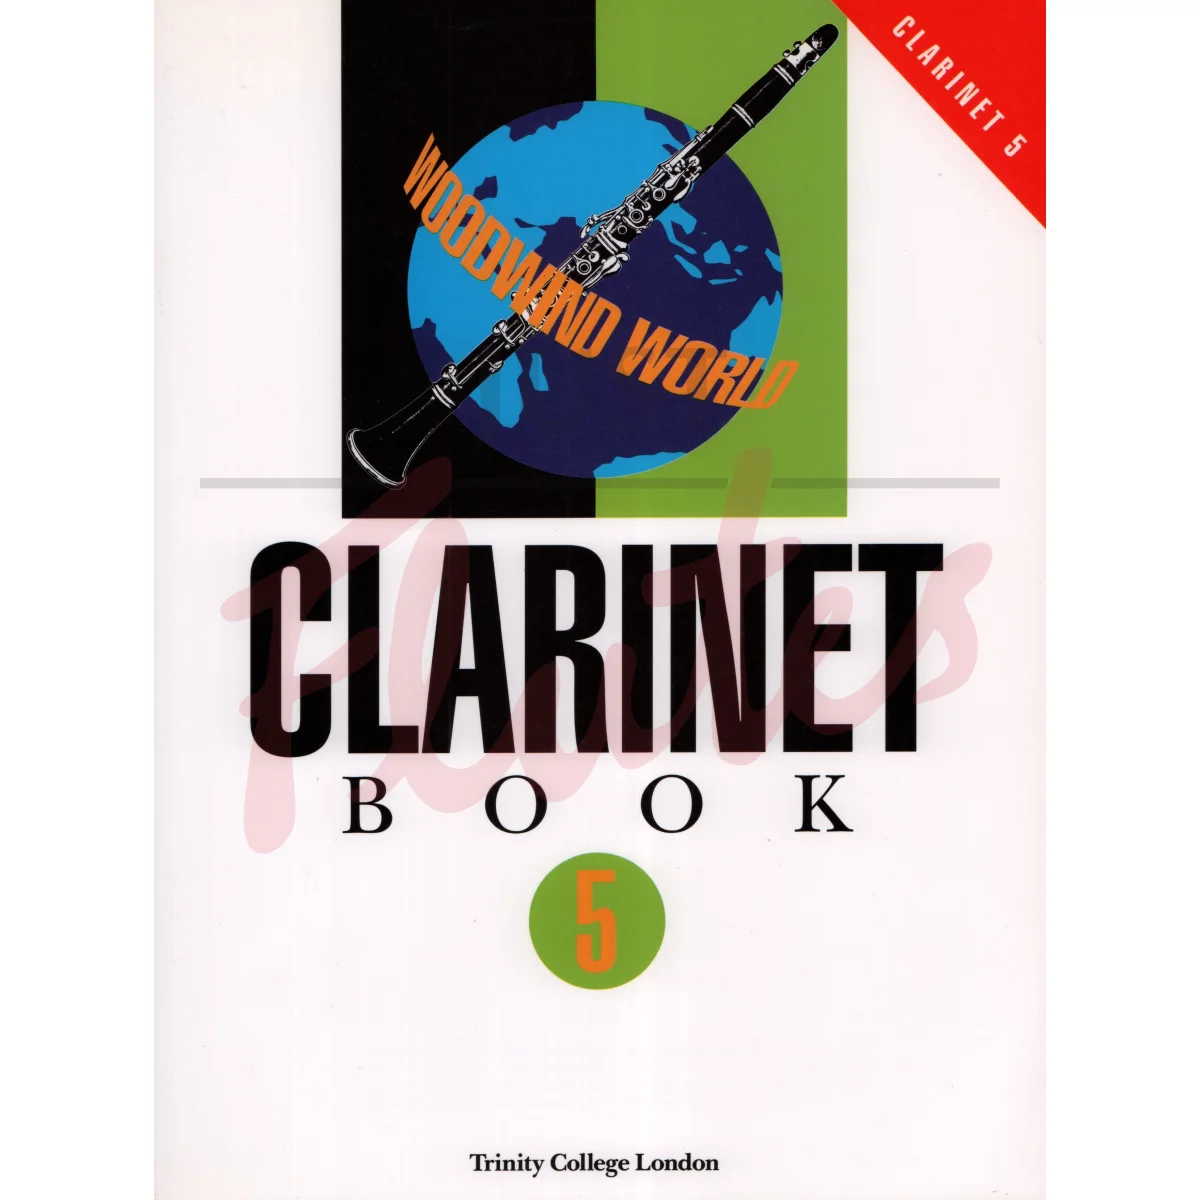 Woodwind World Clarinet 5 for Clarinet and Piano